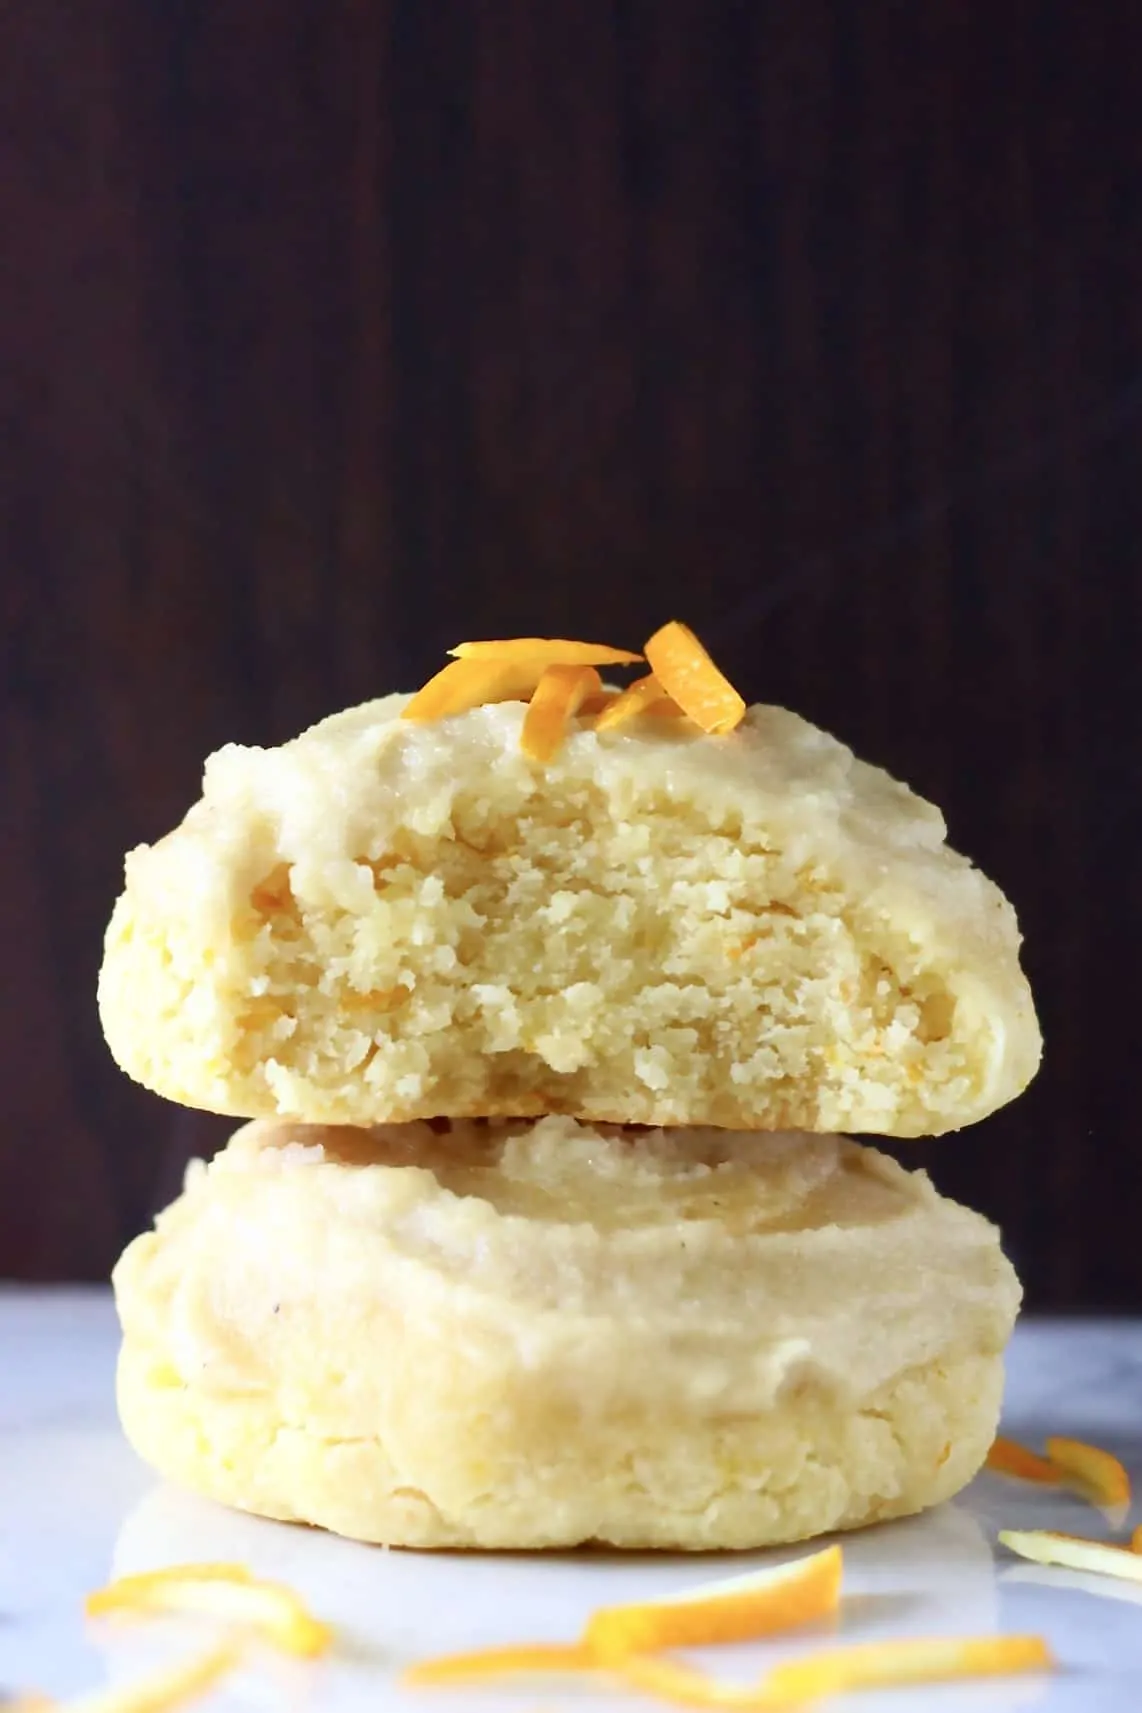 Two gluten-free vegan orange cookies stacked on top of each other, one with a bite taken out